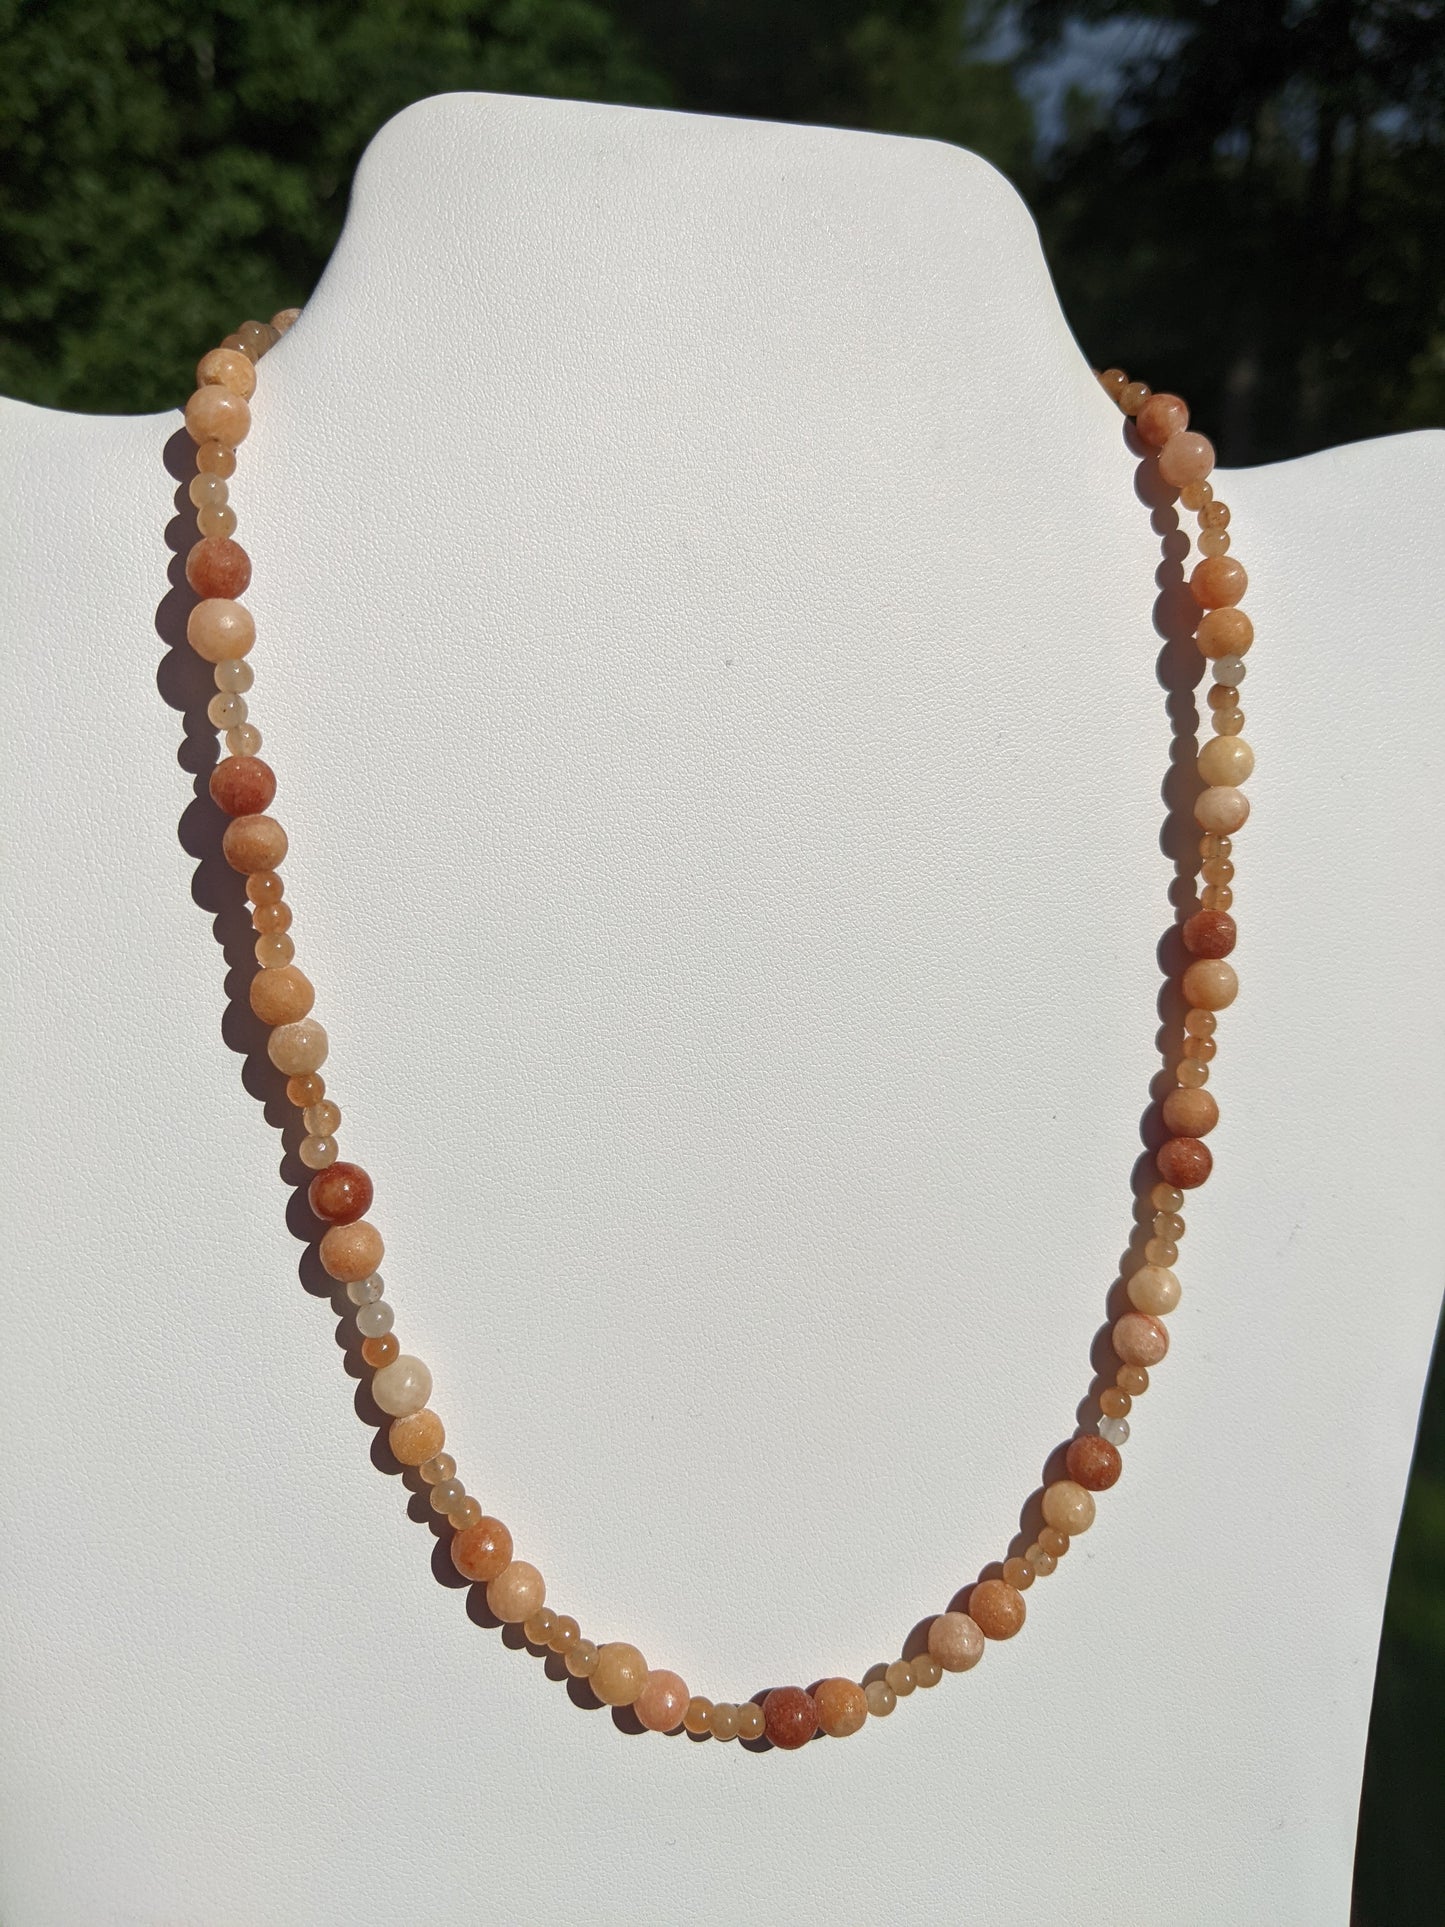 Carnelian Necklace with Art Deco Heart Clasp